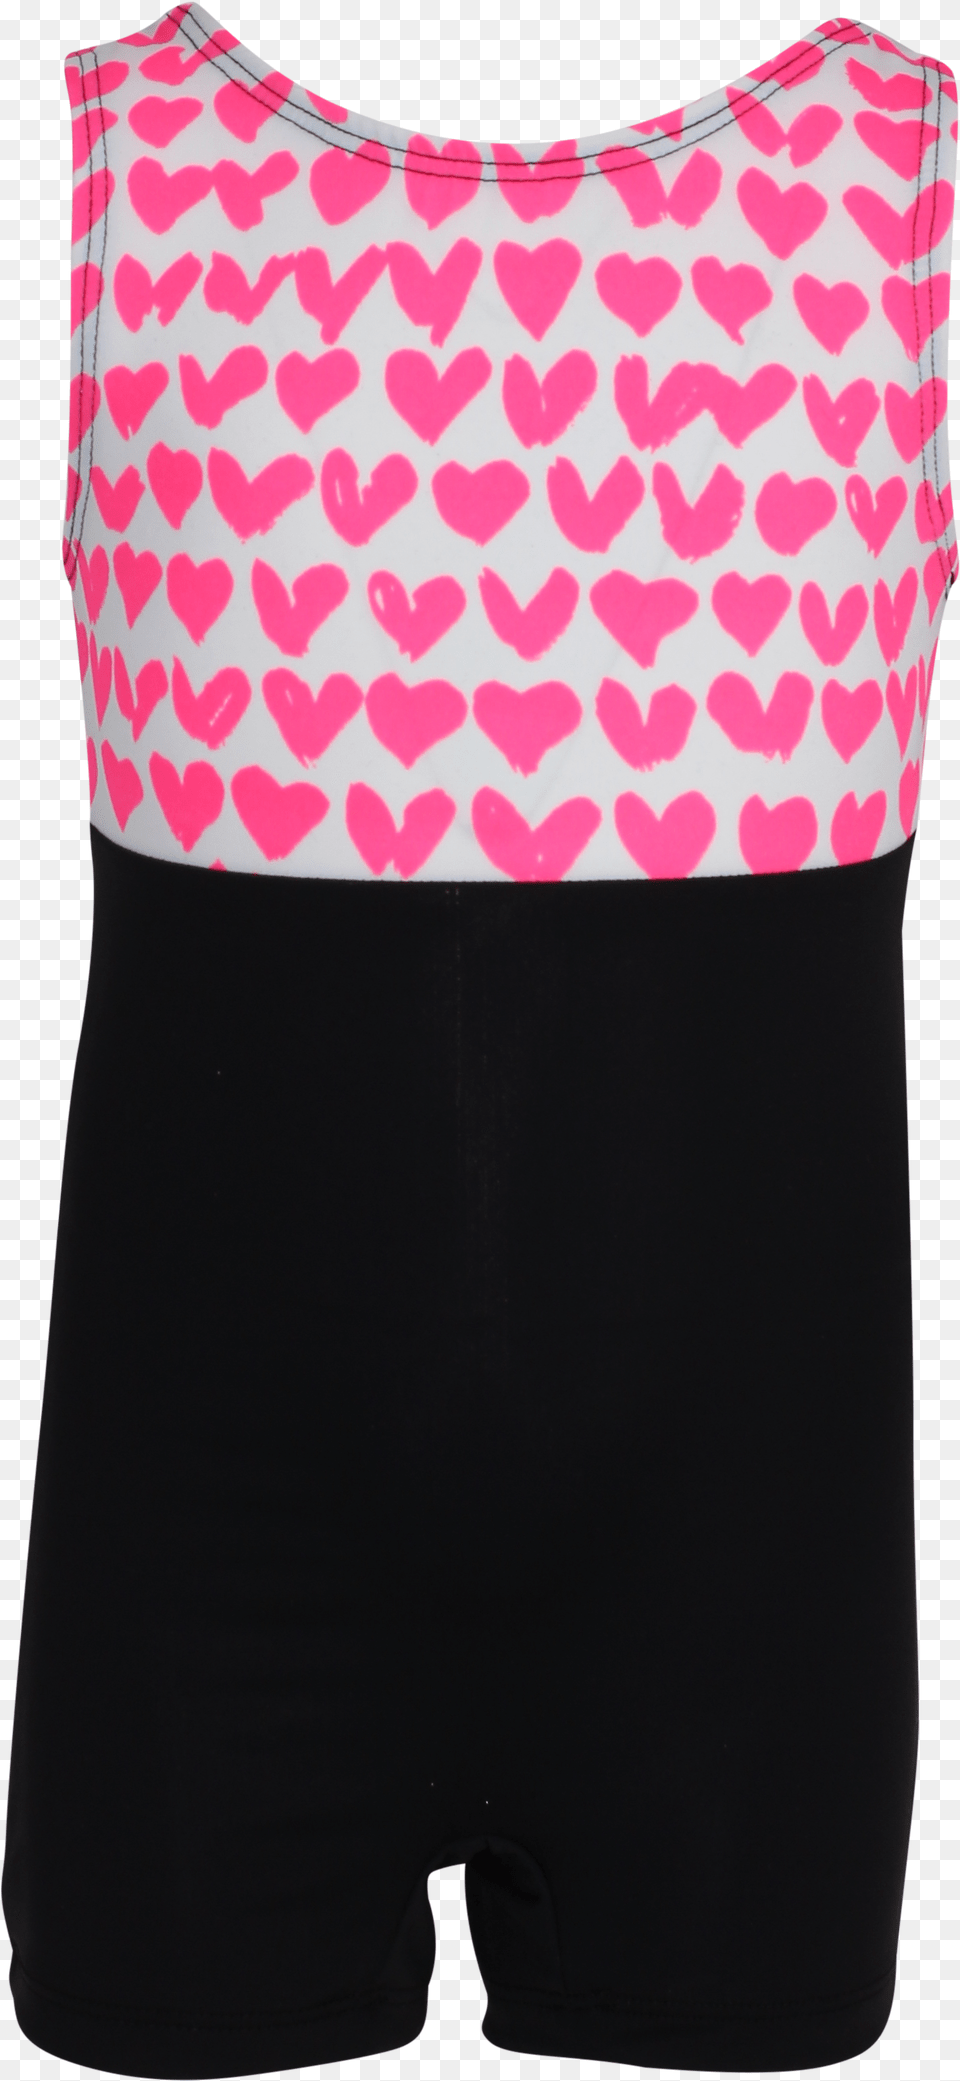 Neon Pink Hearts Tank Unitard Trunks, Blouse, Clothing Free Transparent Png